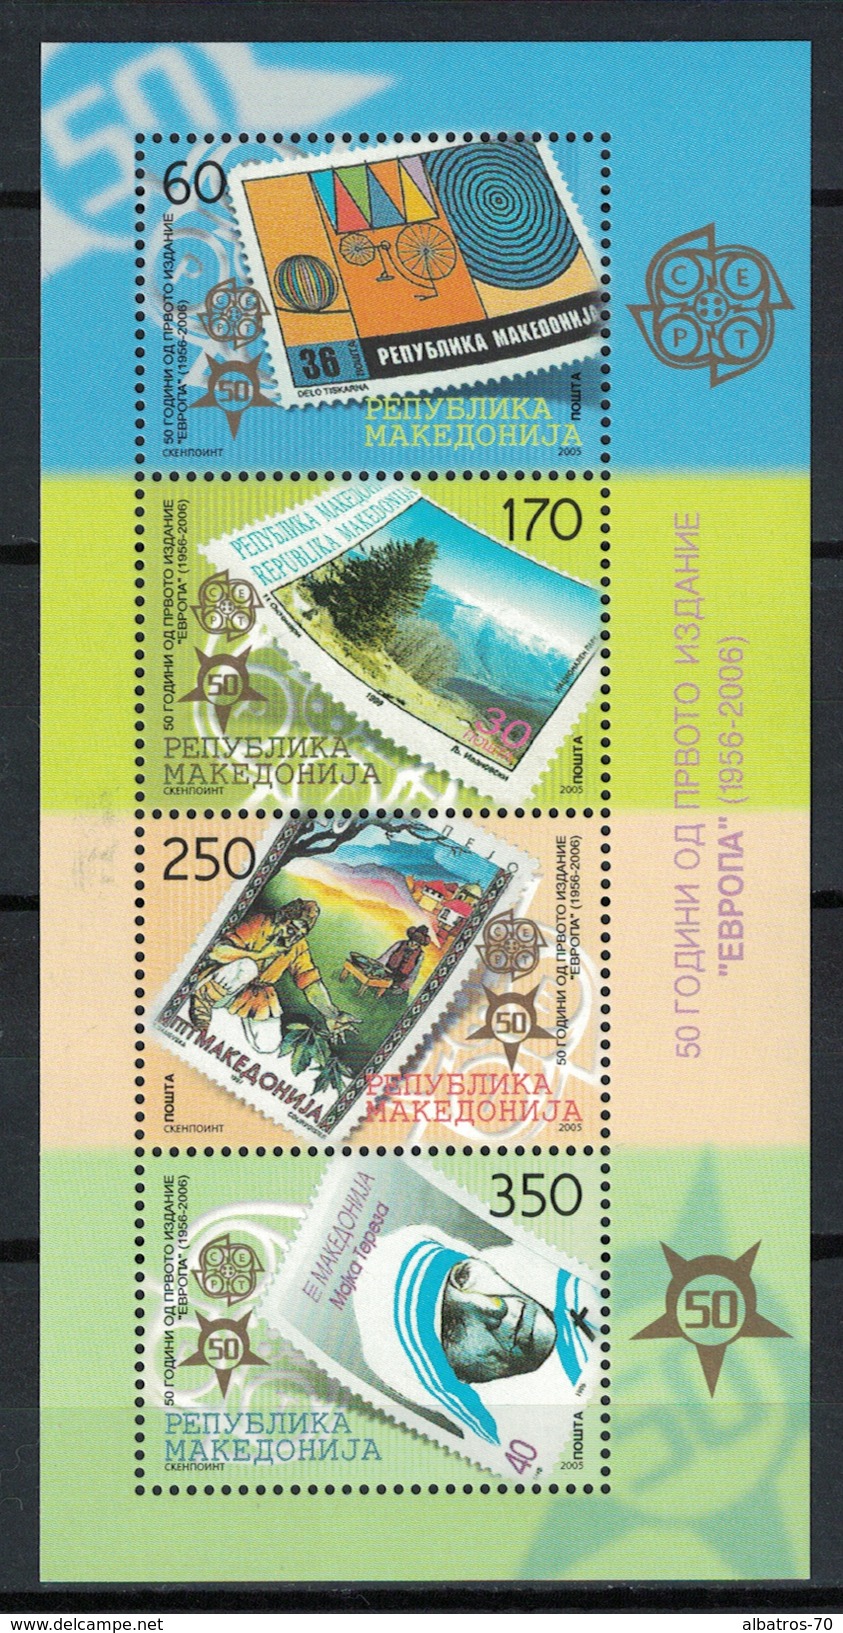 Macedonia 2005 _ 50 X The 50th Anniversary Of The First Europa Postage Stamp _ Minisheet - MNH ** - Macedonia Del Nord